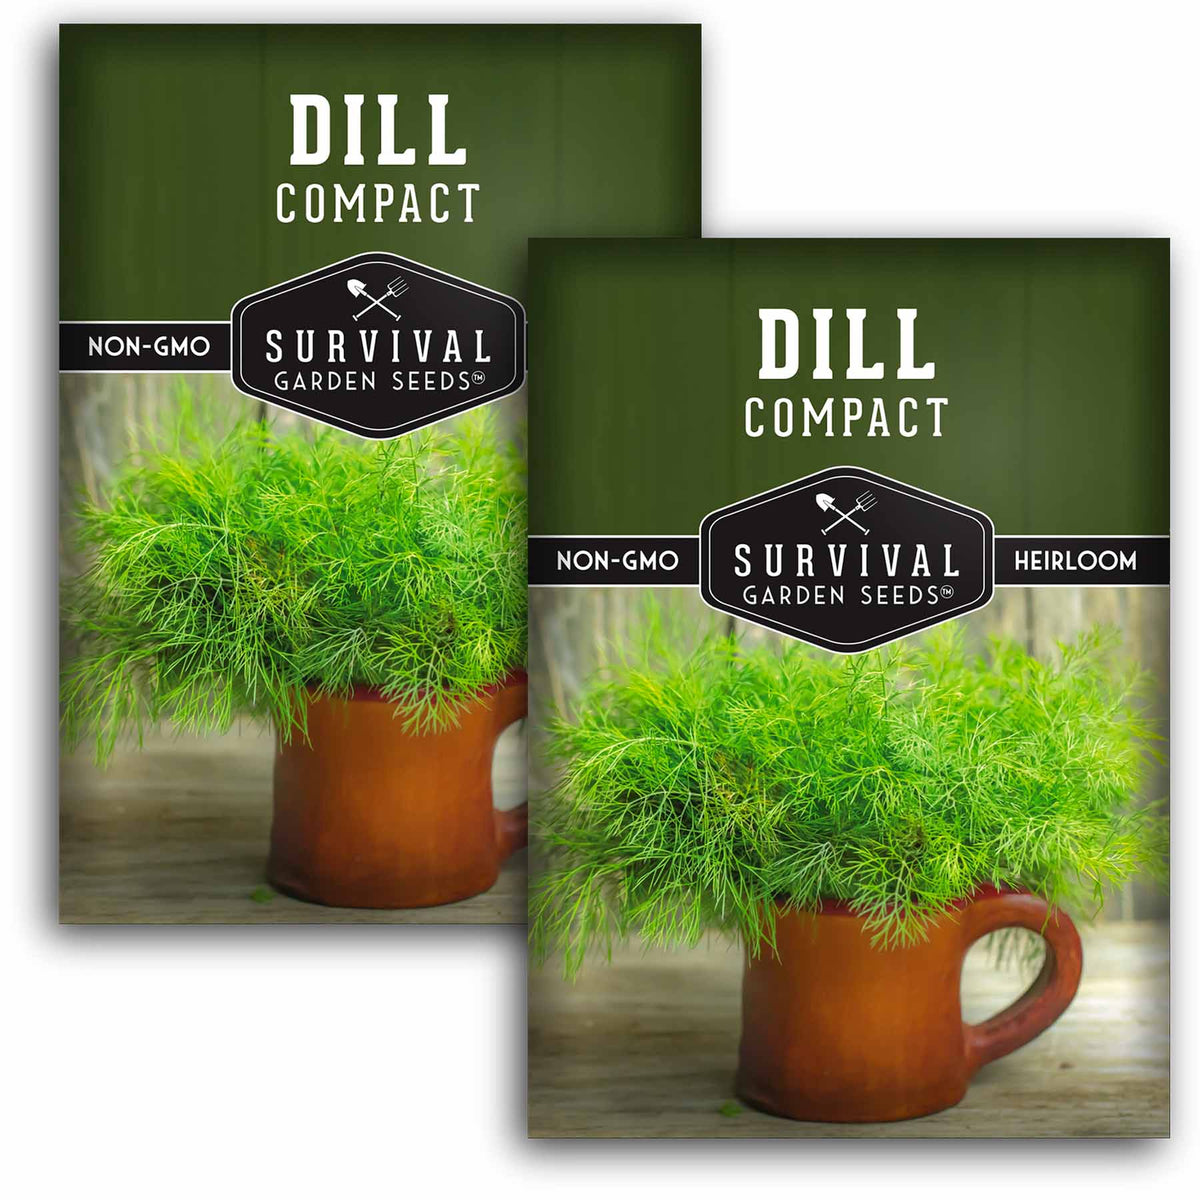 2 packets of Compact Dill seeds